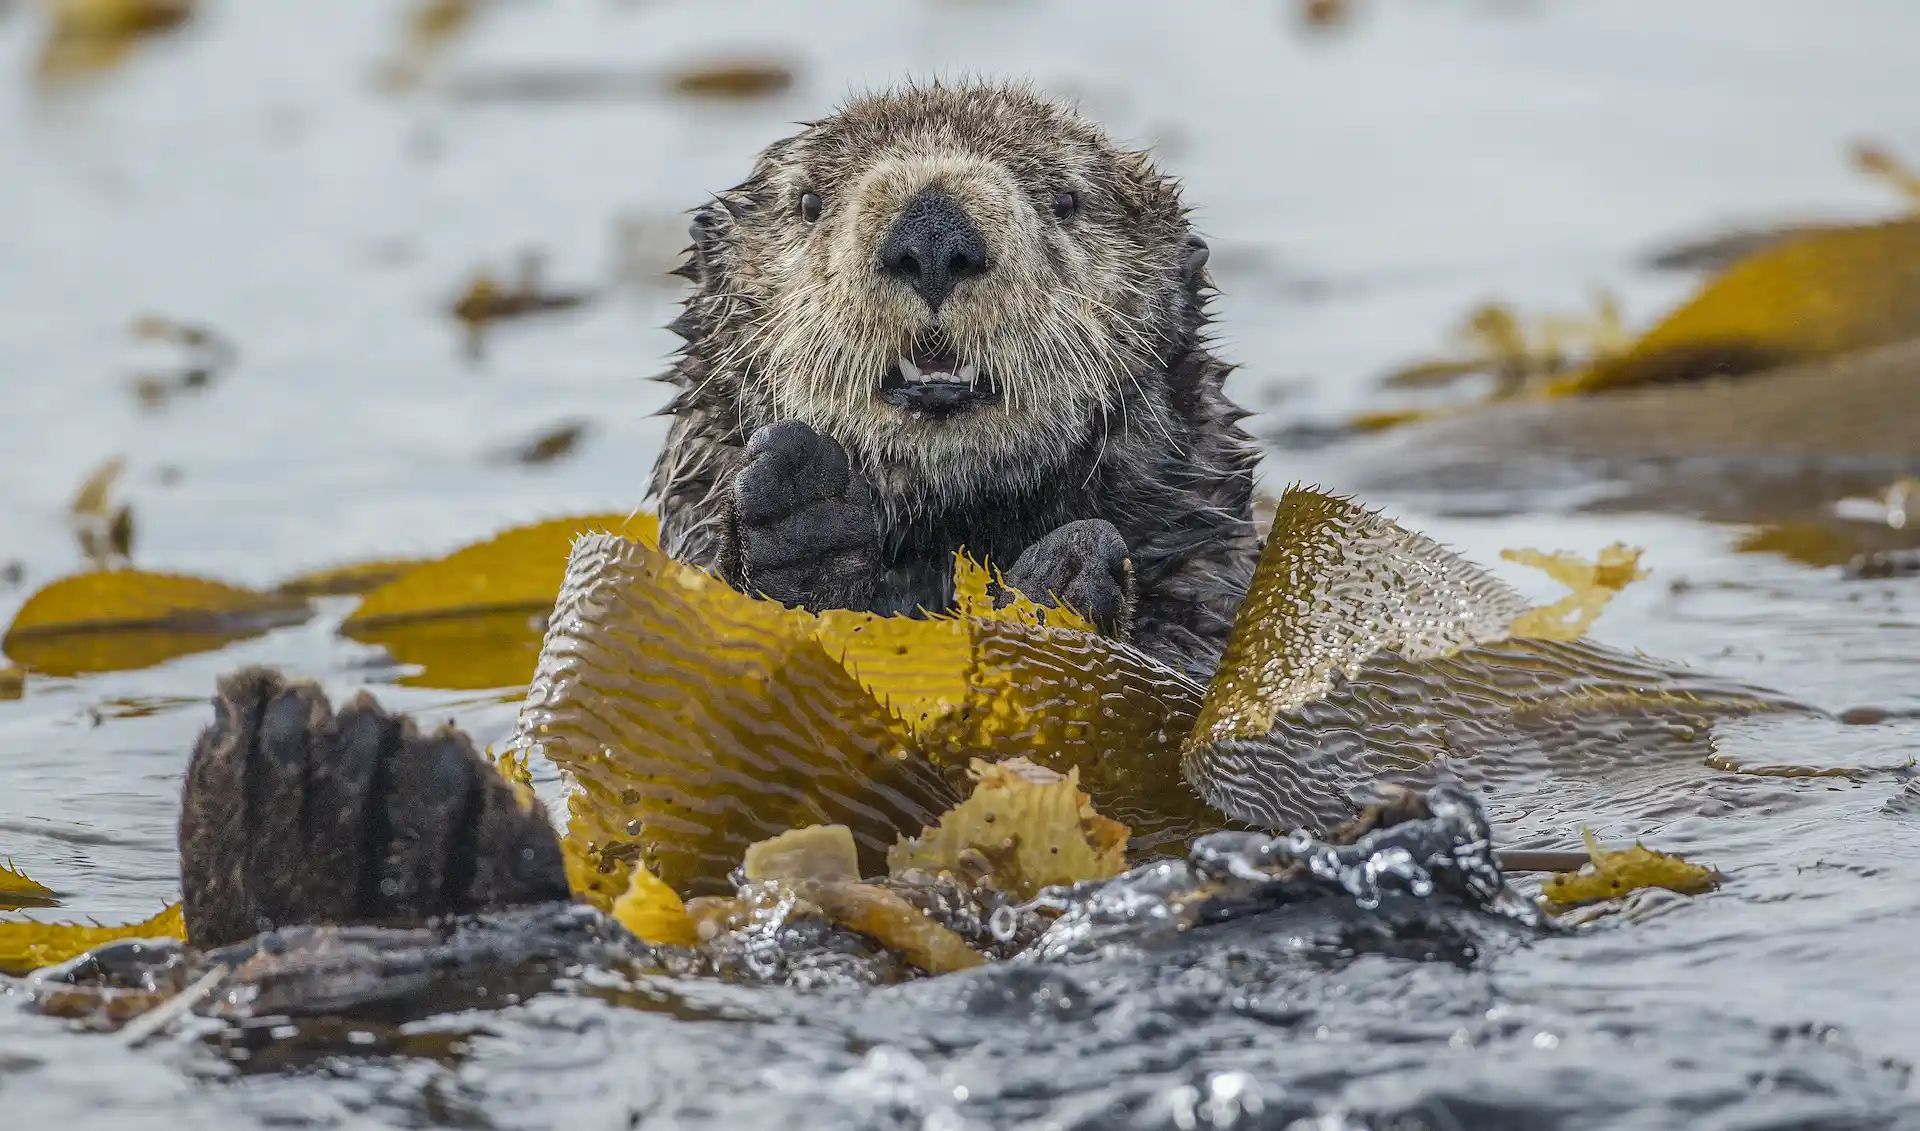 A male sea otter frolicking in a kelp bed off the coast of Sitka, Alaska.